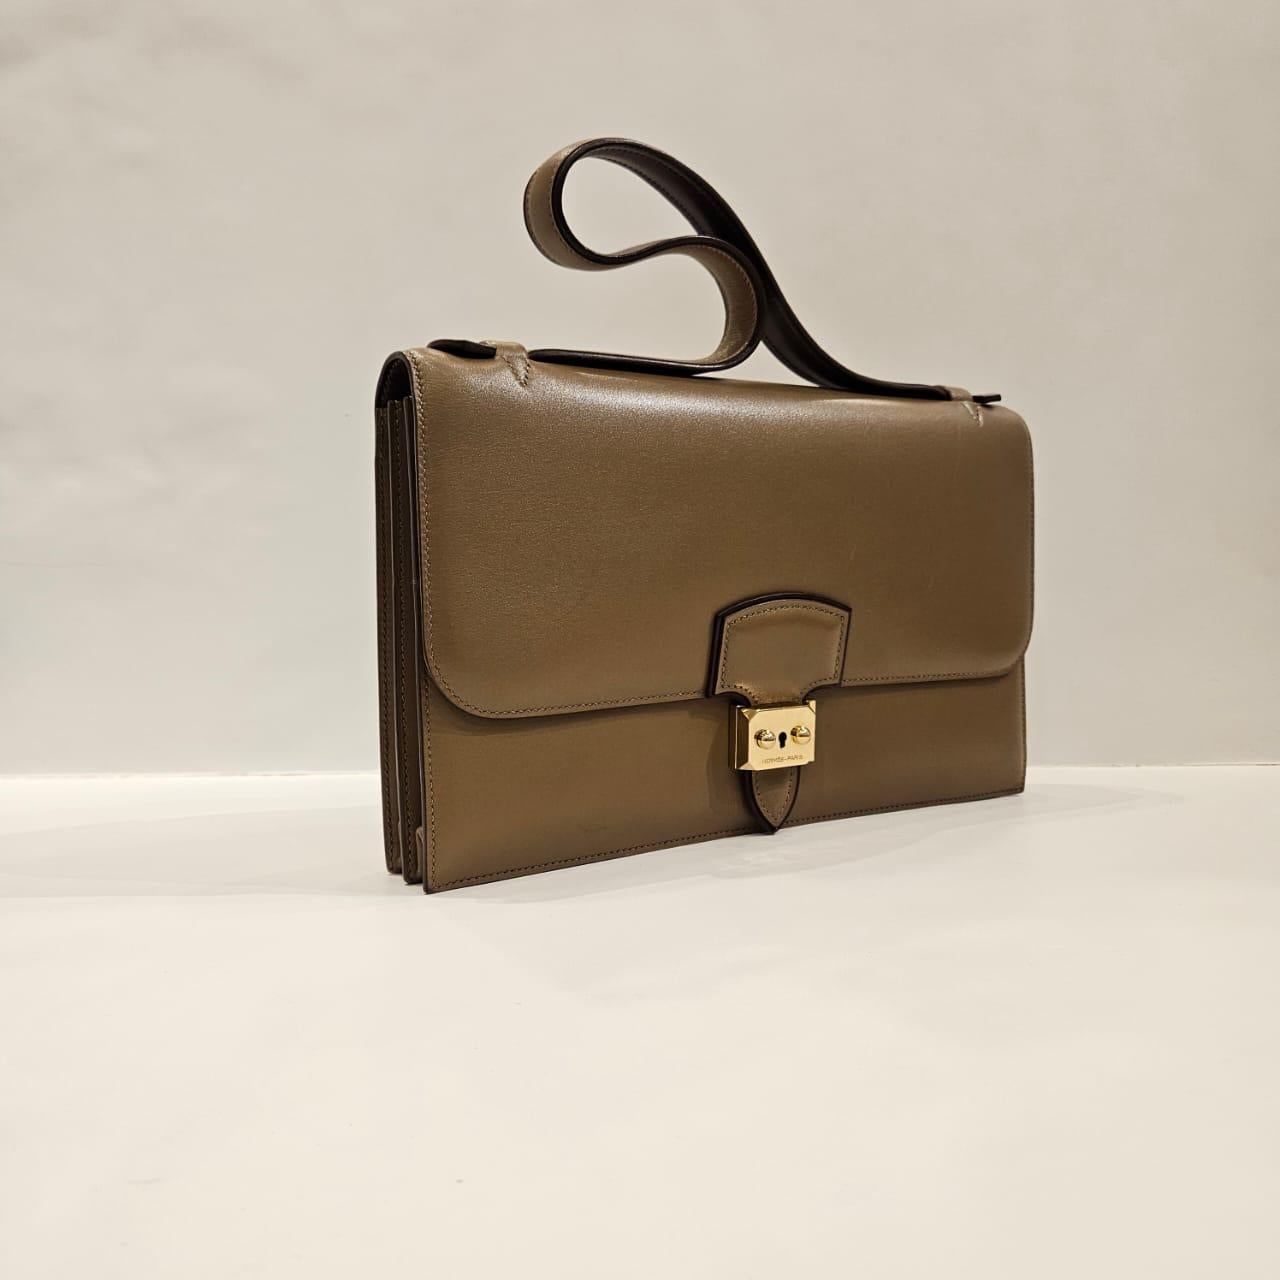 Classy hermes elan illico bag in swift leather with gold hardware. Faint scratches on the leather surface as seen on pictures. Stamp Square O (2011).